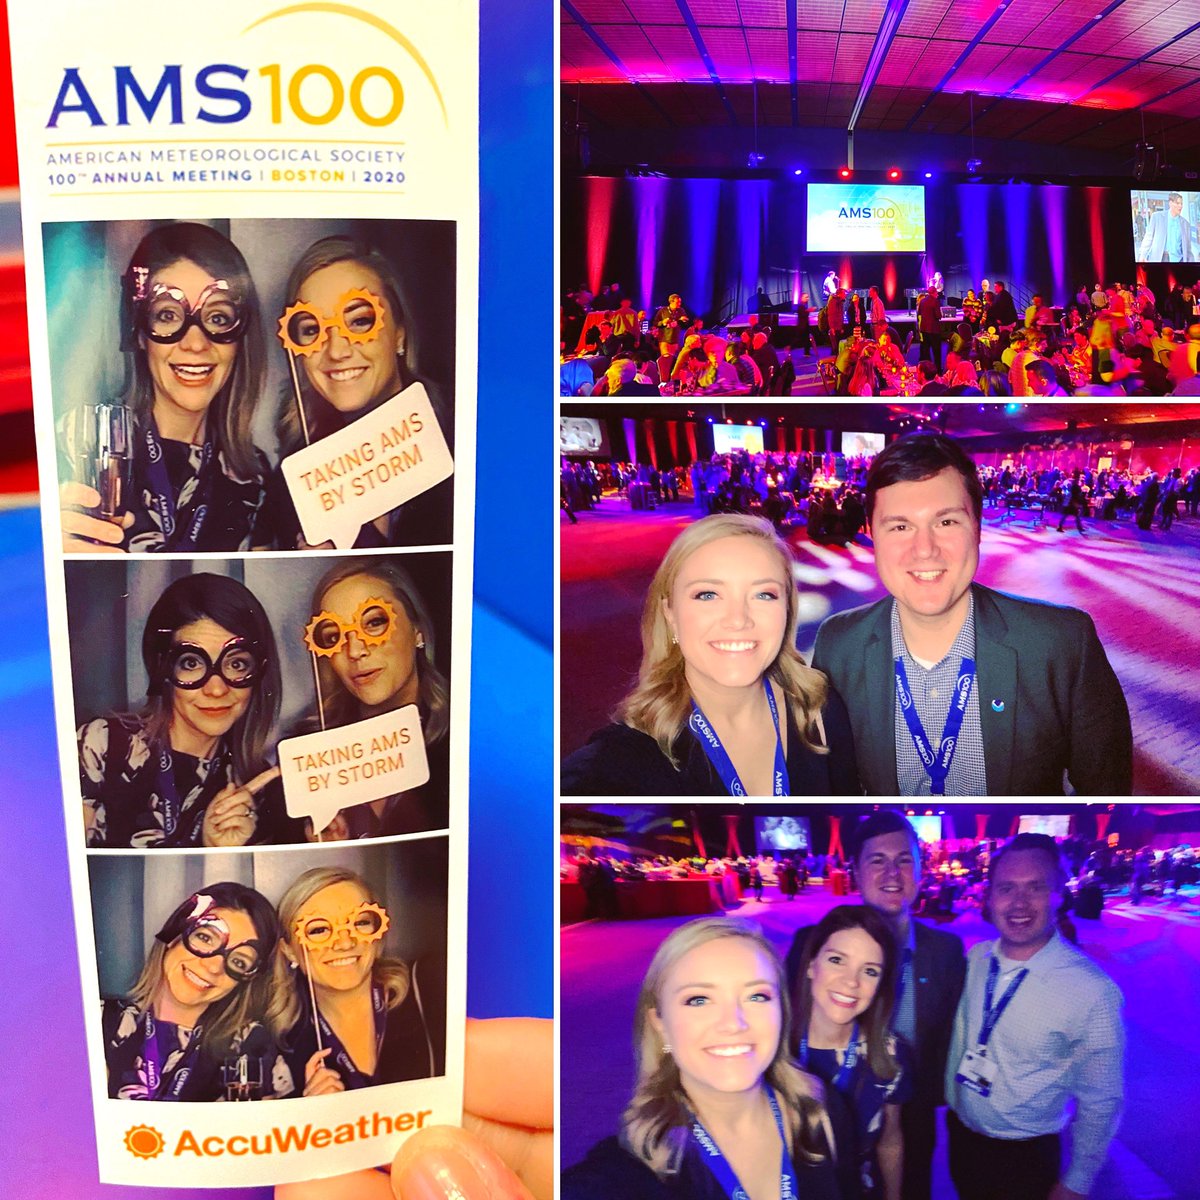 Cheers to 💯 years, @ametsoc!  Had a blast at the #CentennialCelebration last night.  #AMS100 #AMS2020